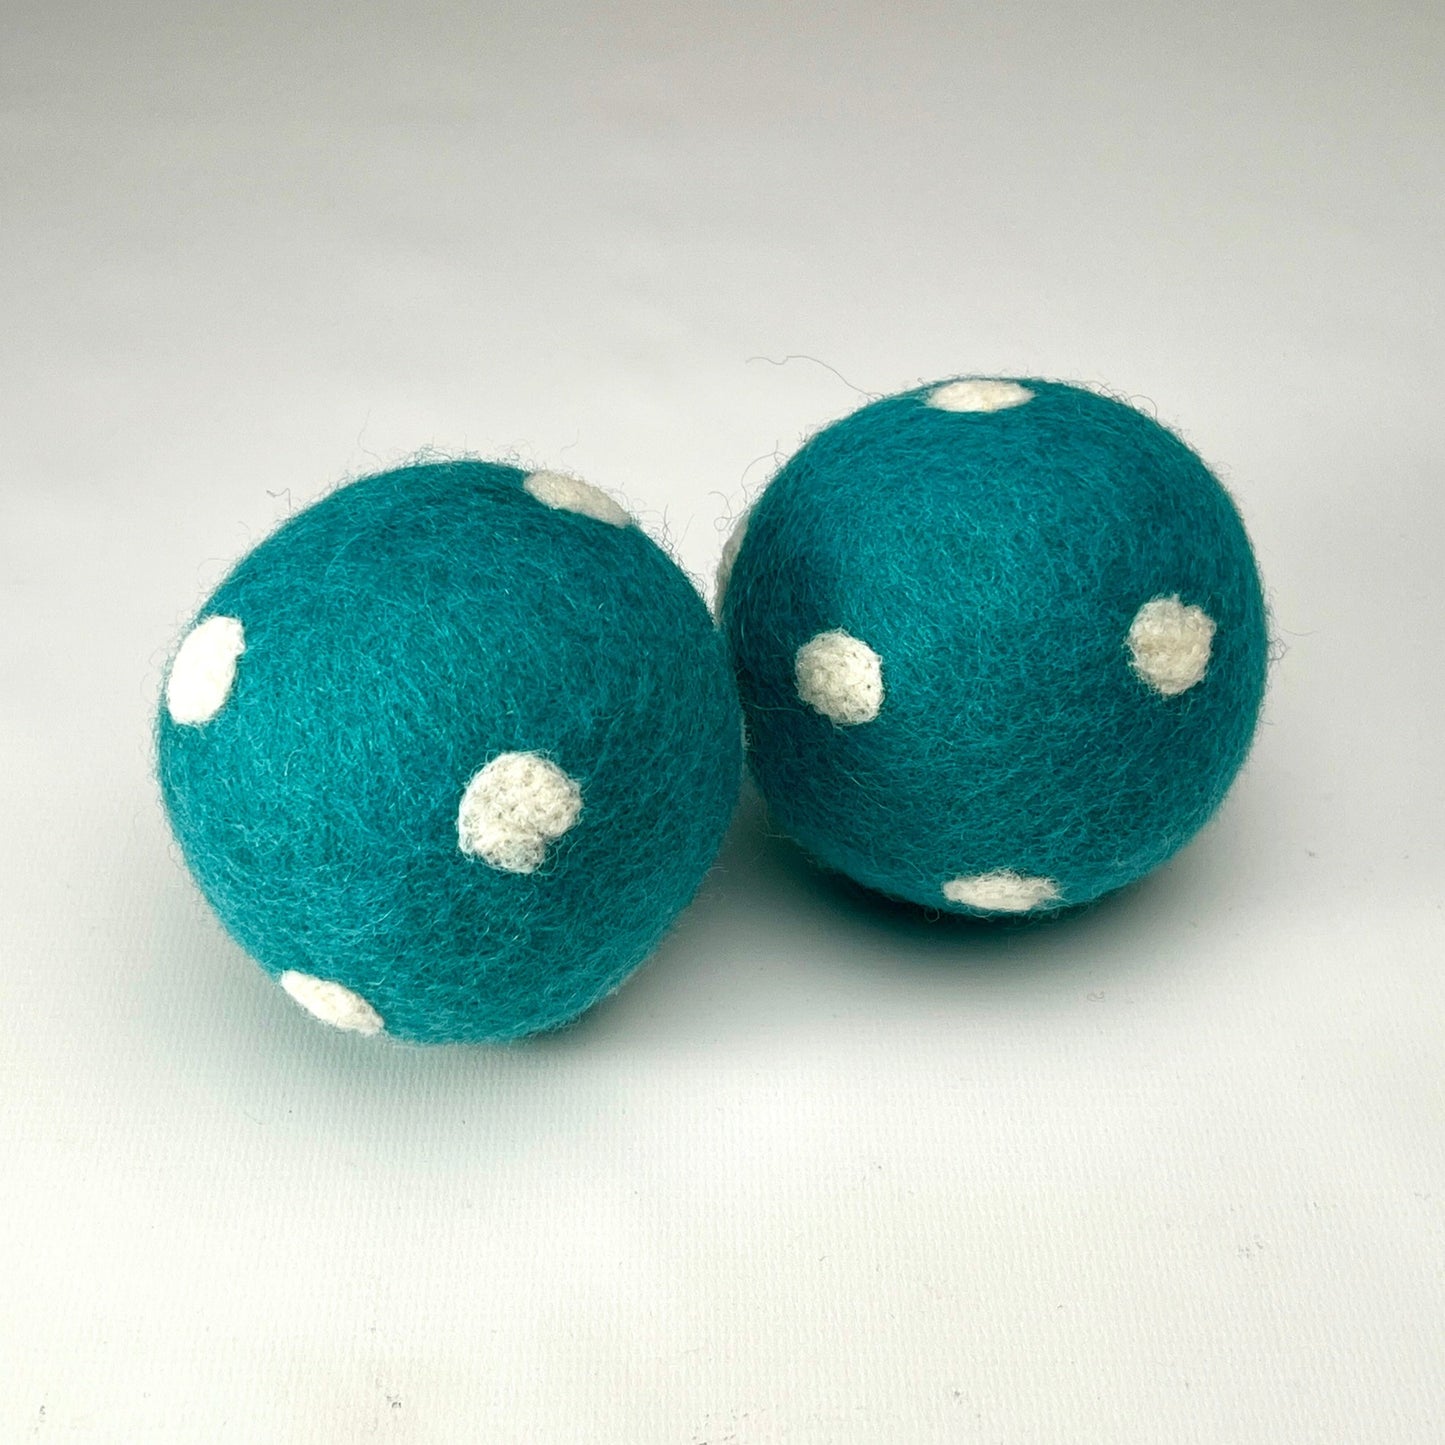 Dog Toys - blue felt balls with white dots - for indoor play.